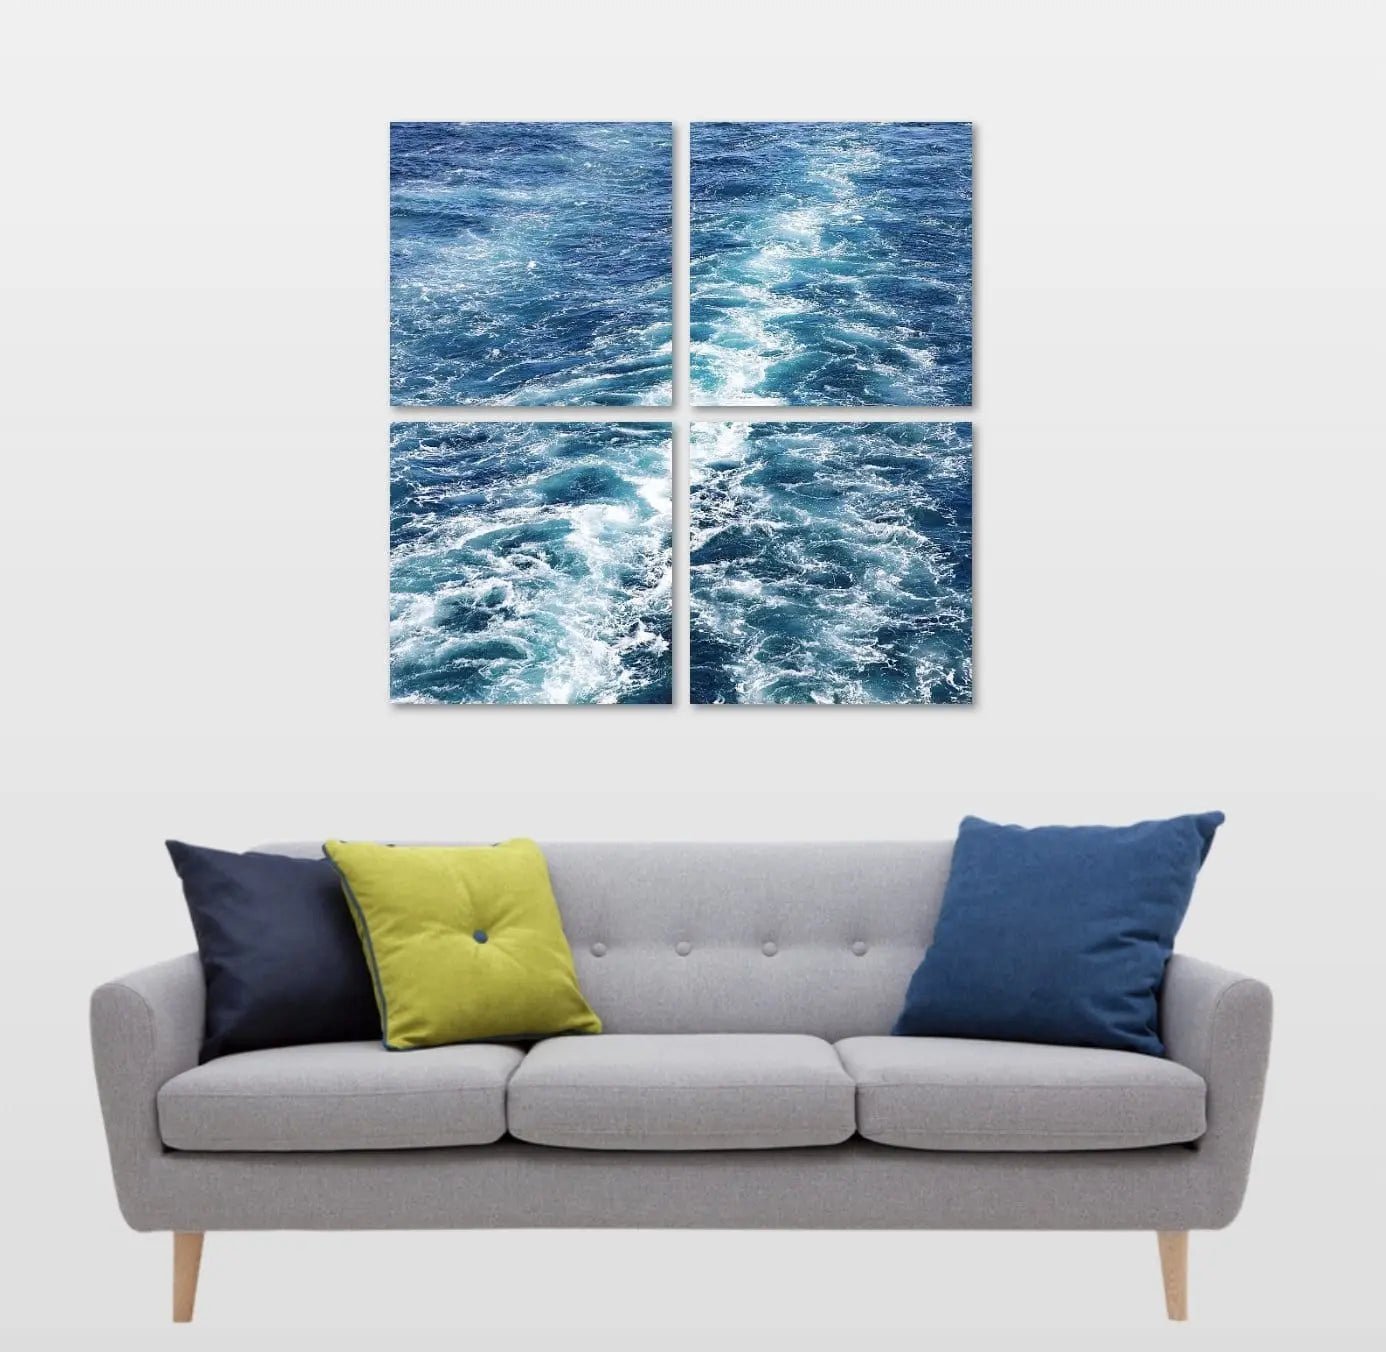 Color of Blue Ocean Waves grid layout displayed over couch on wall by Lisa Blount Photography